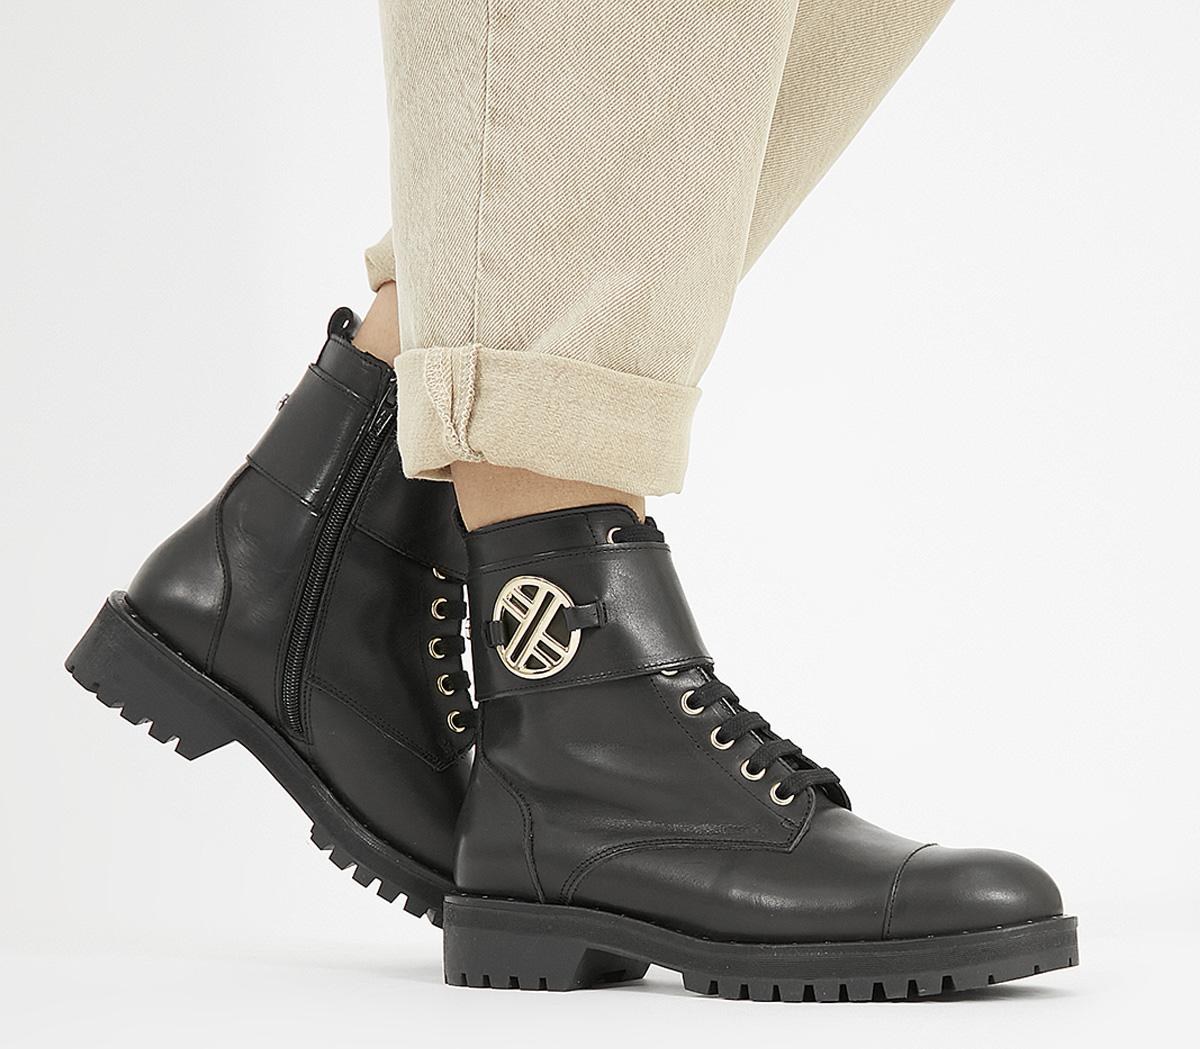 OFFICEAmbiguous Lace Up BootsBlack Leather With Gold Hardware